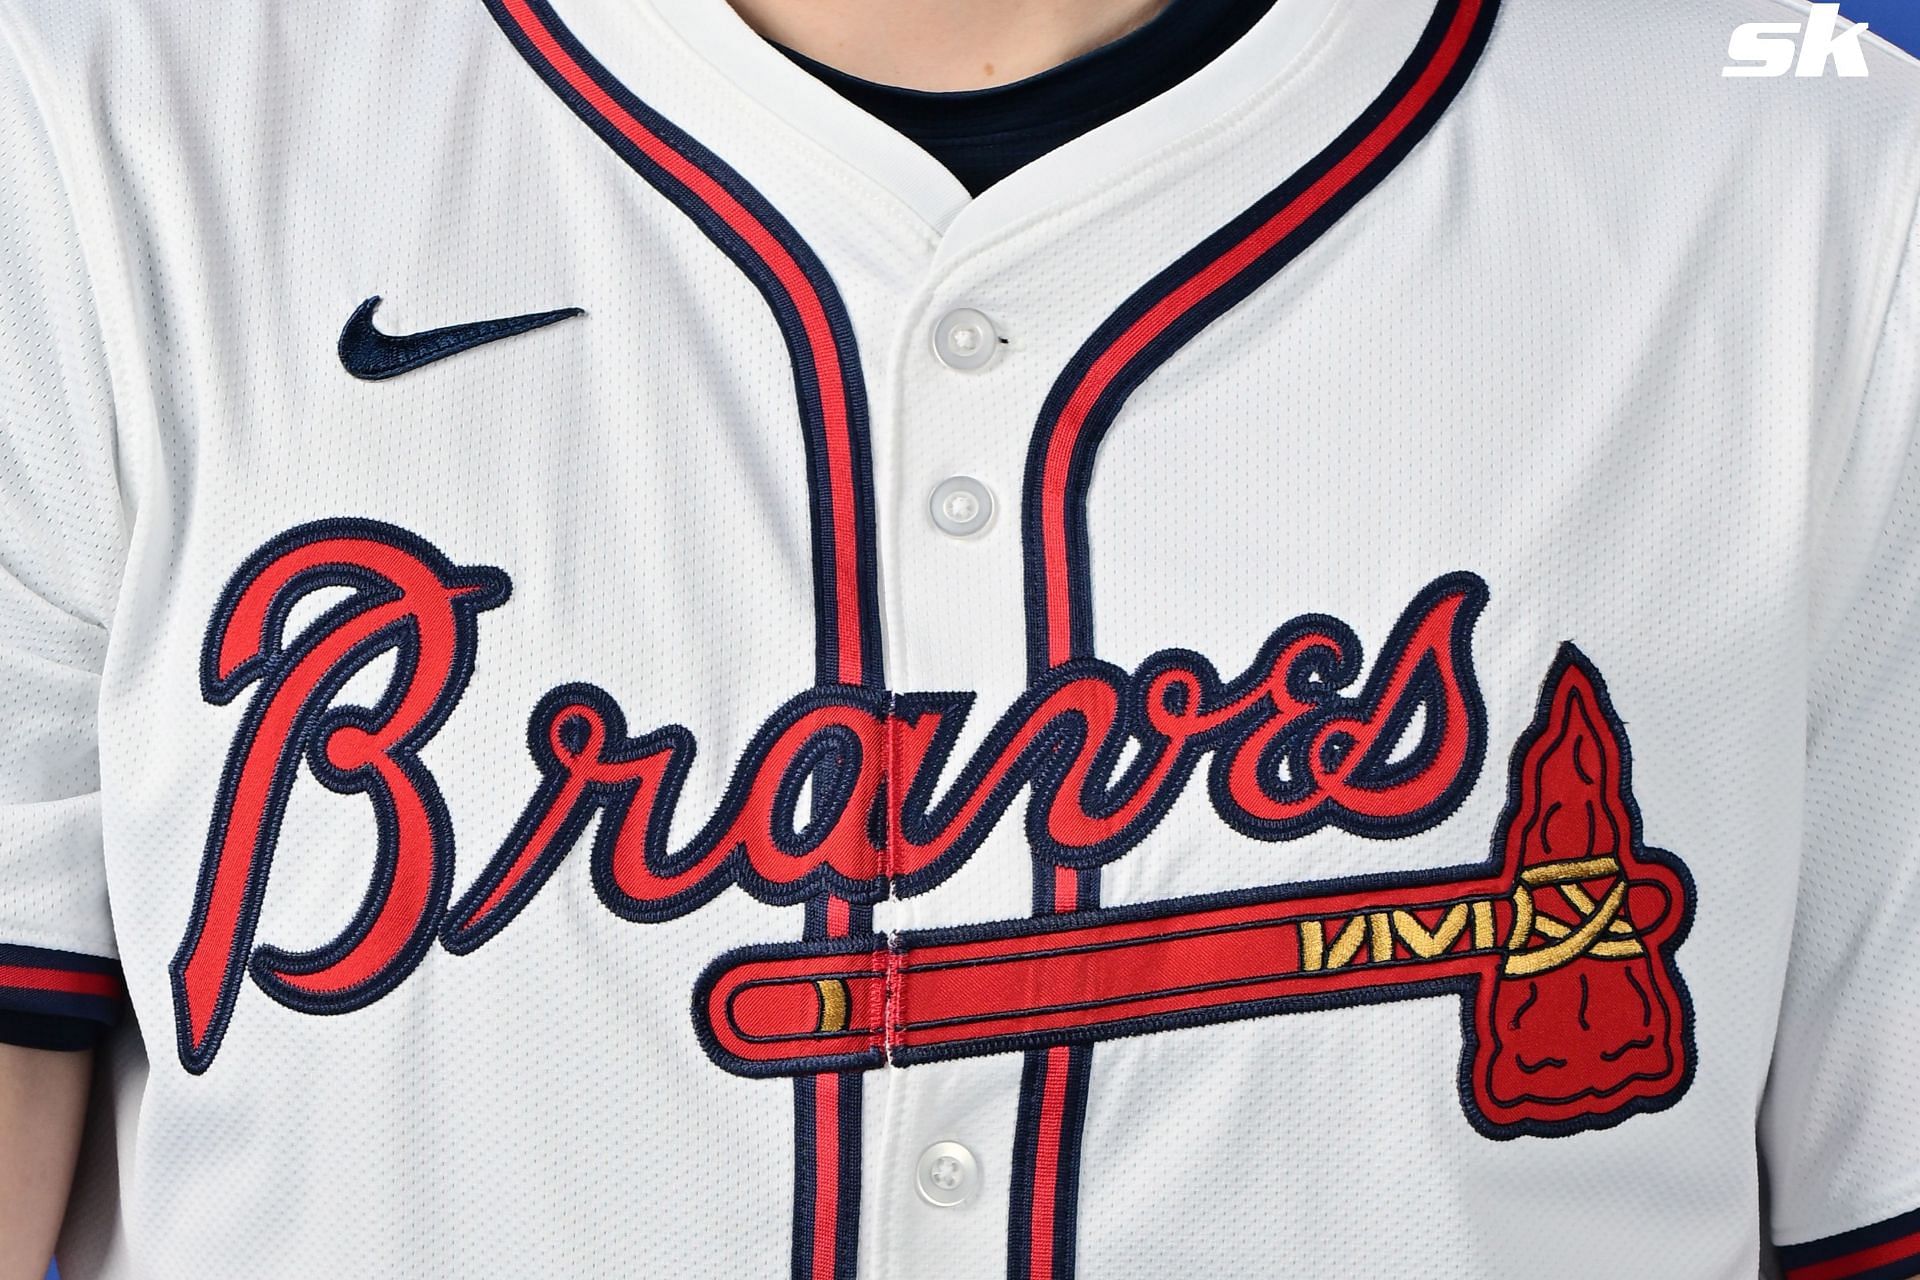 Jeff Passan believes that the Braves have a real chance of winning the World Series this year.